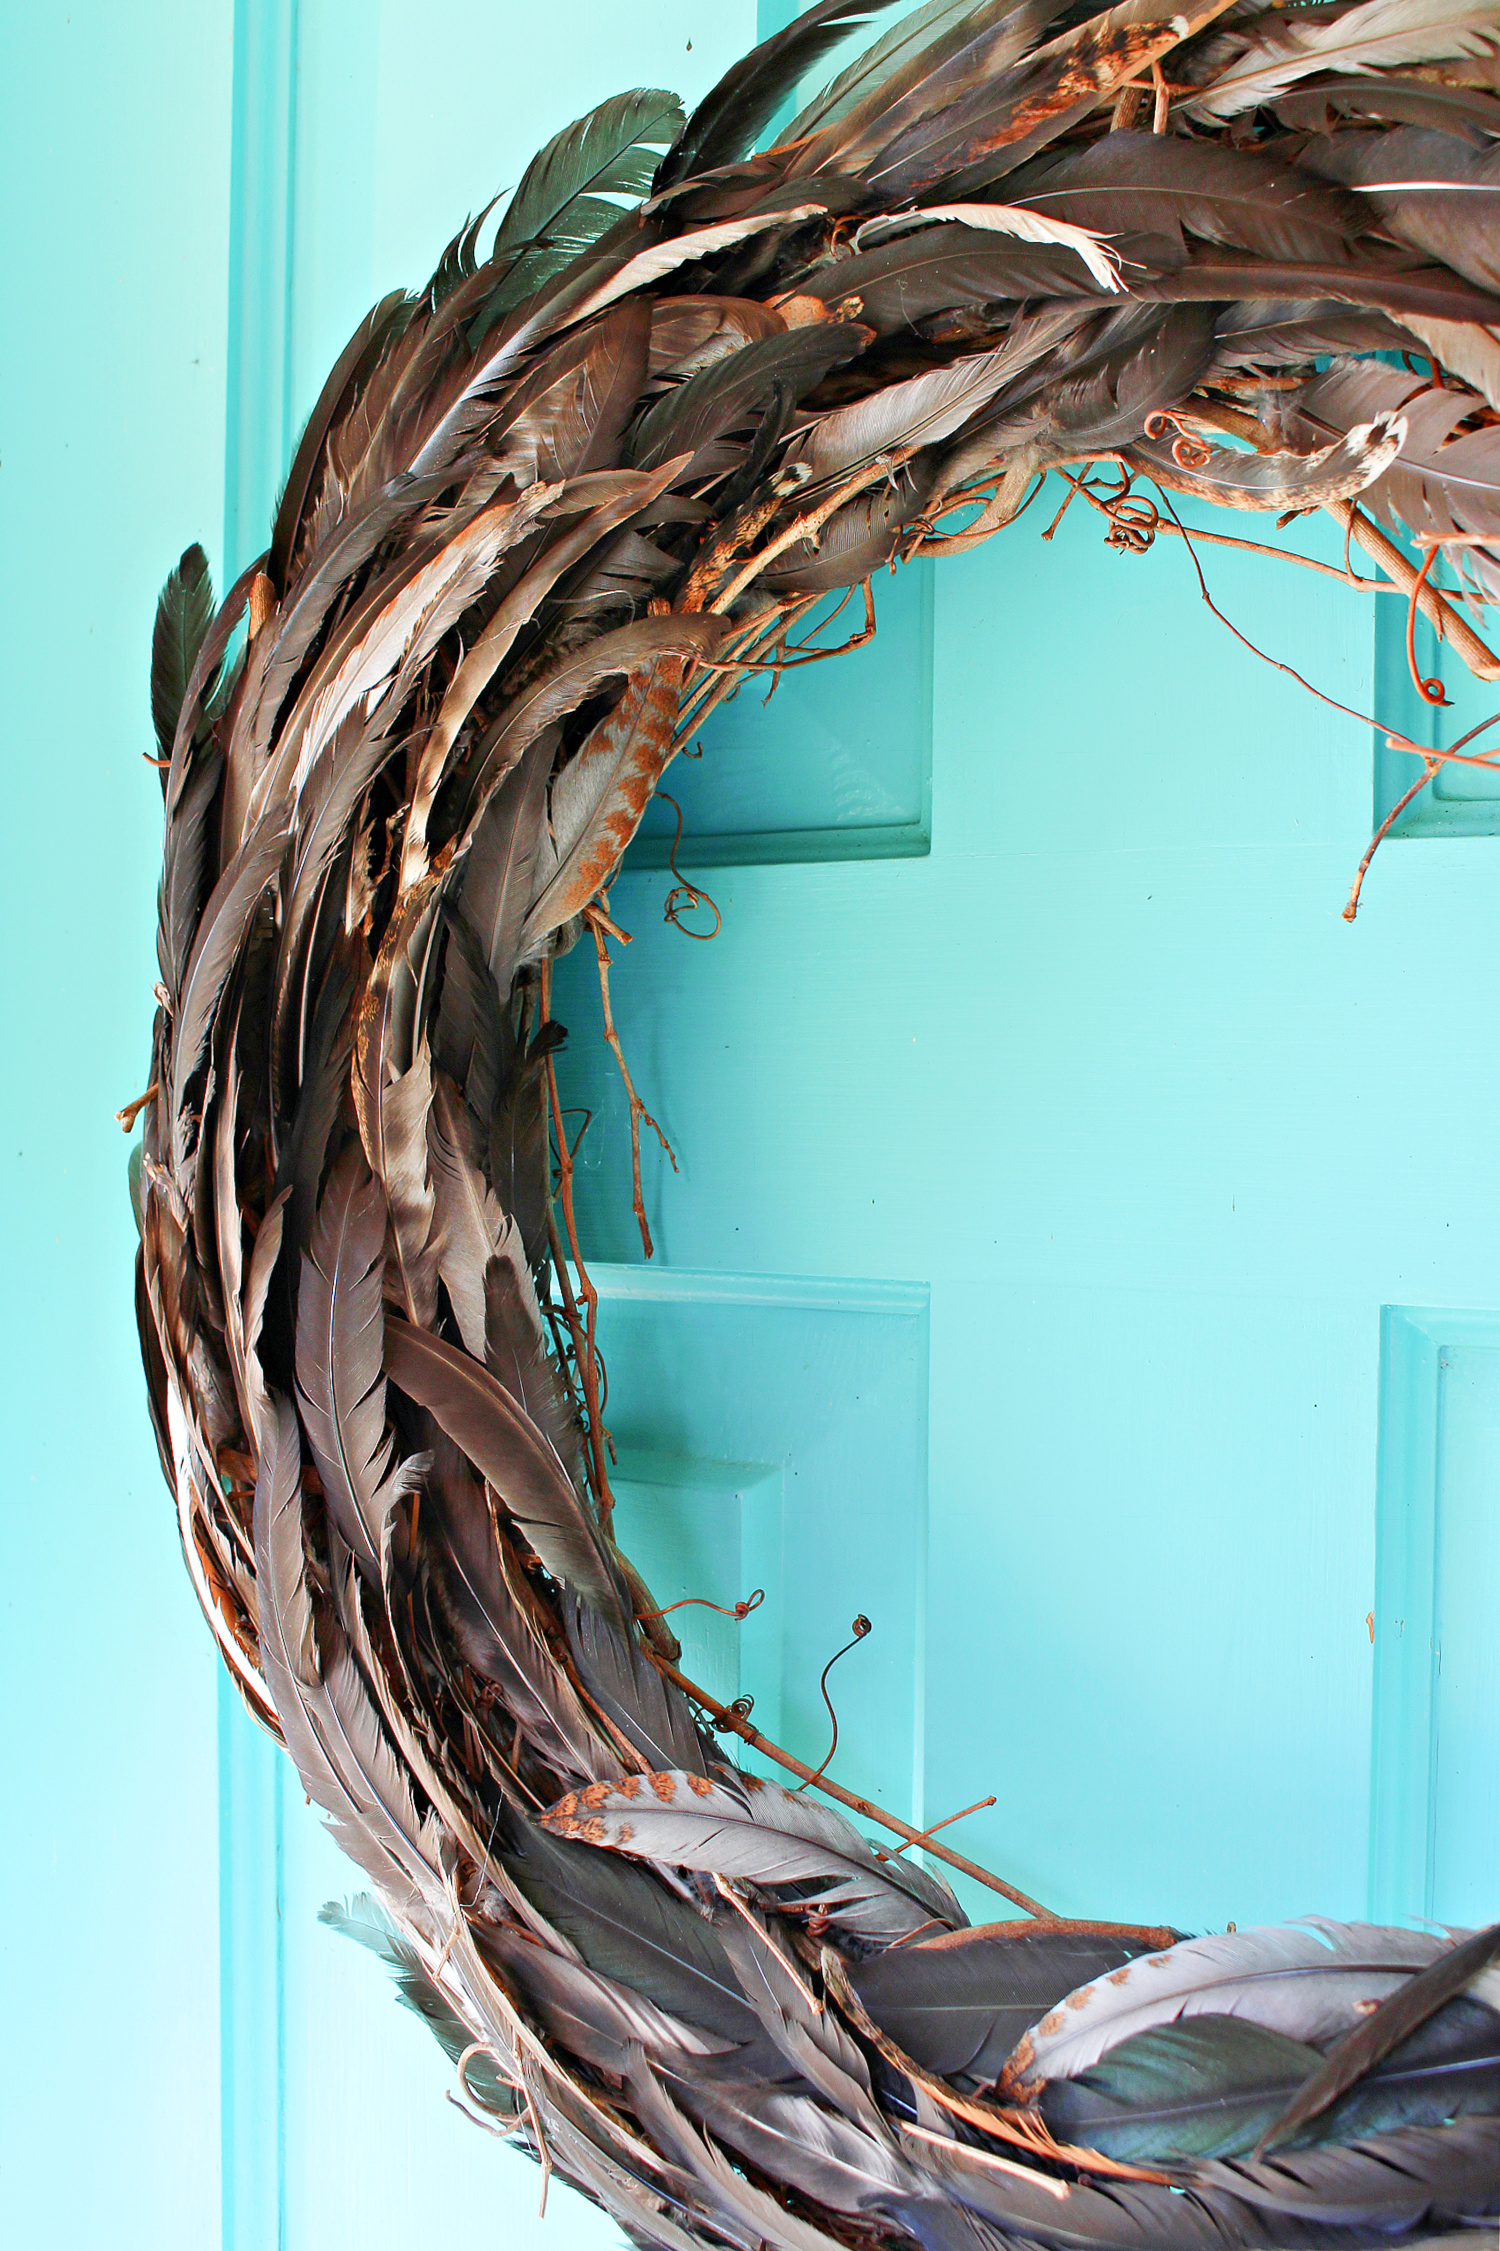 DIY Feather Wreath (Using Feathers My Chickens Molted)